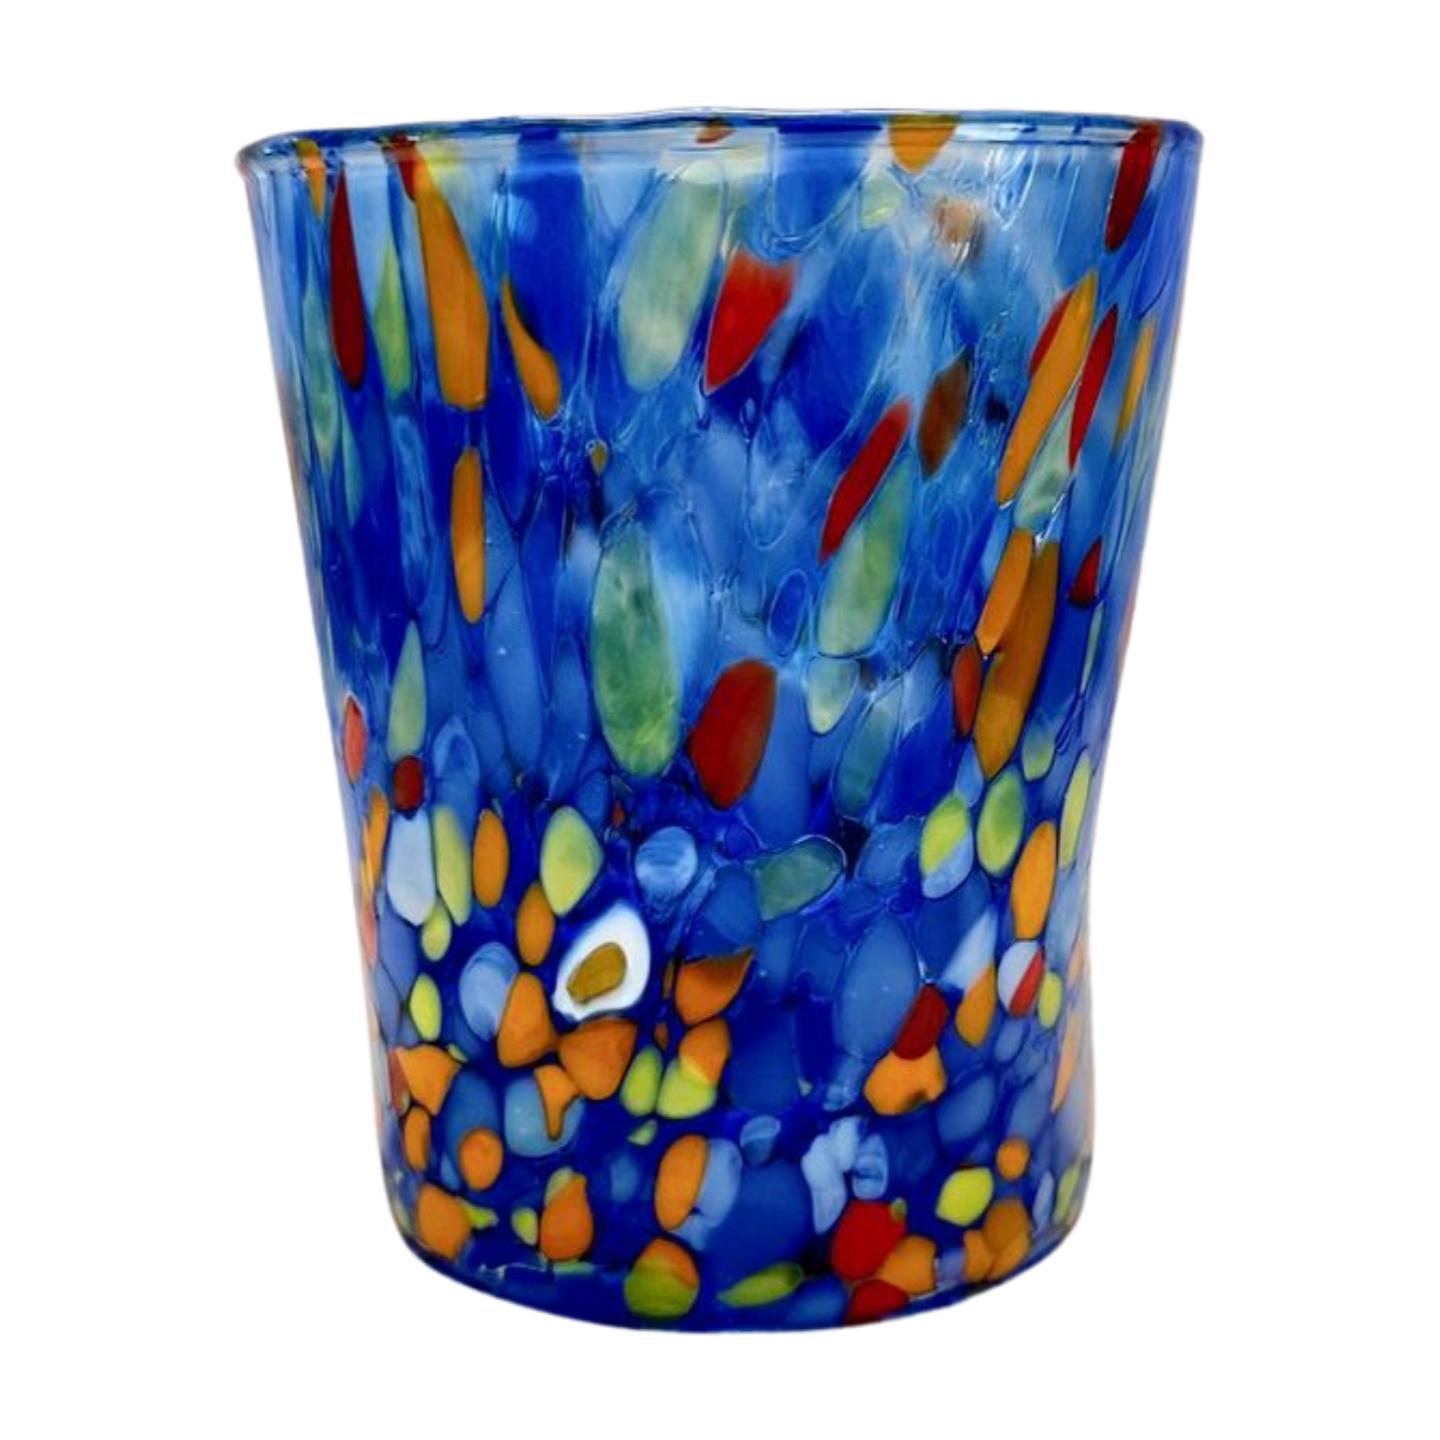 Murano glass tumbler featuring a classic blue design. Heavy and durable, this glass is perfect for serving any beverage.